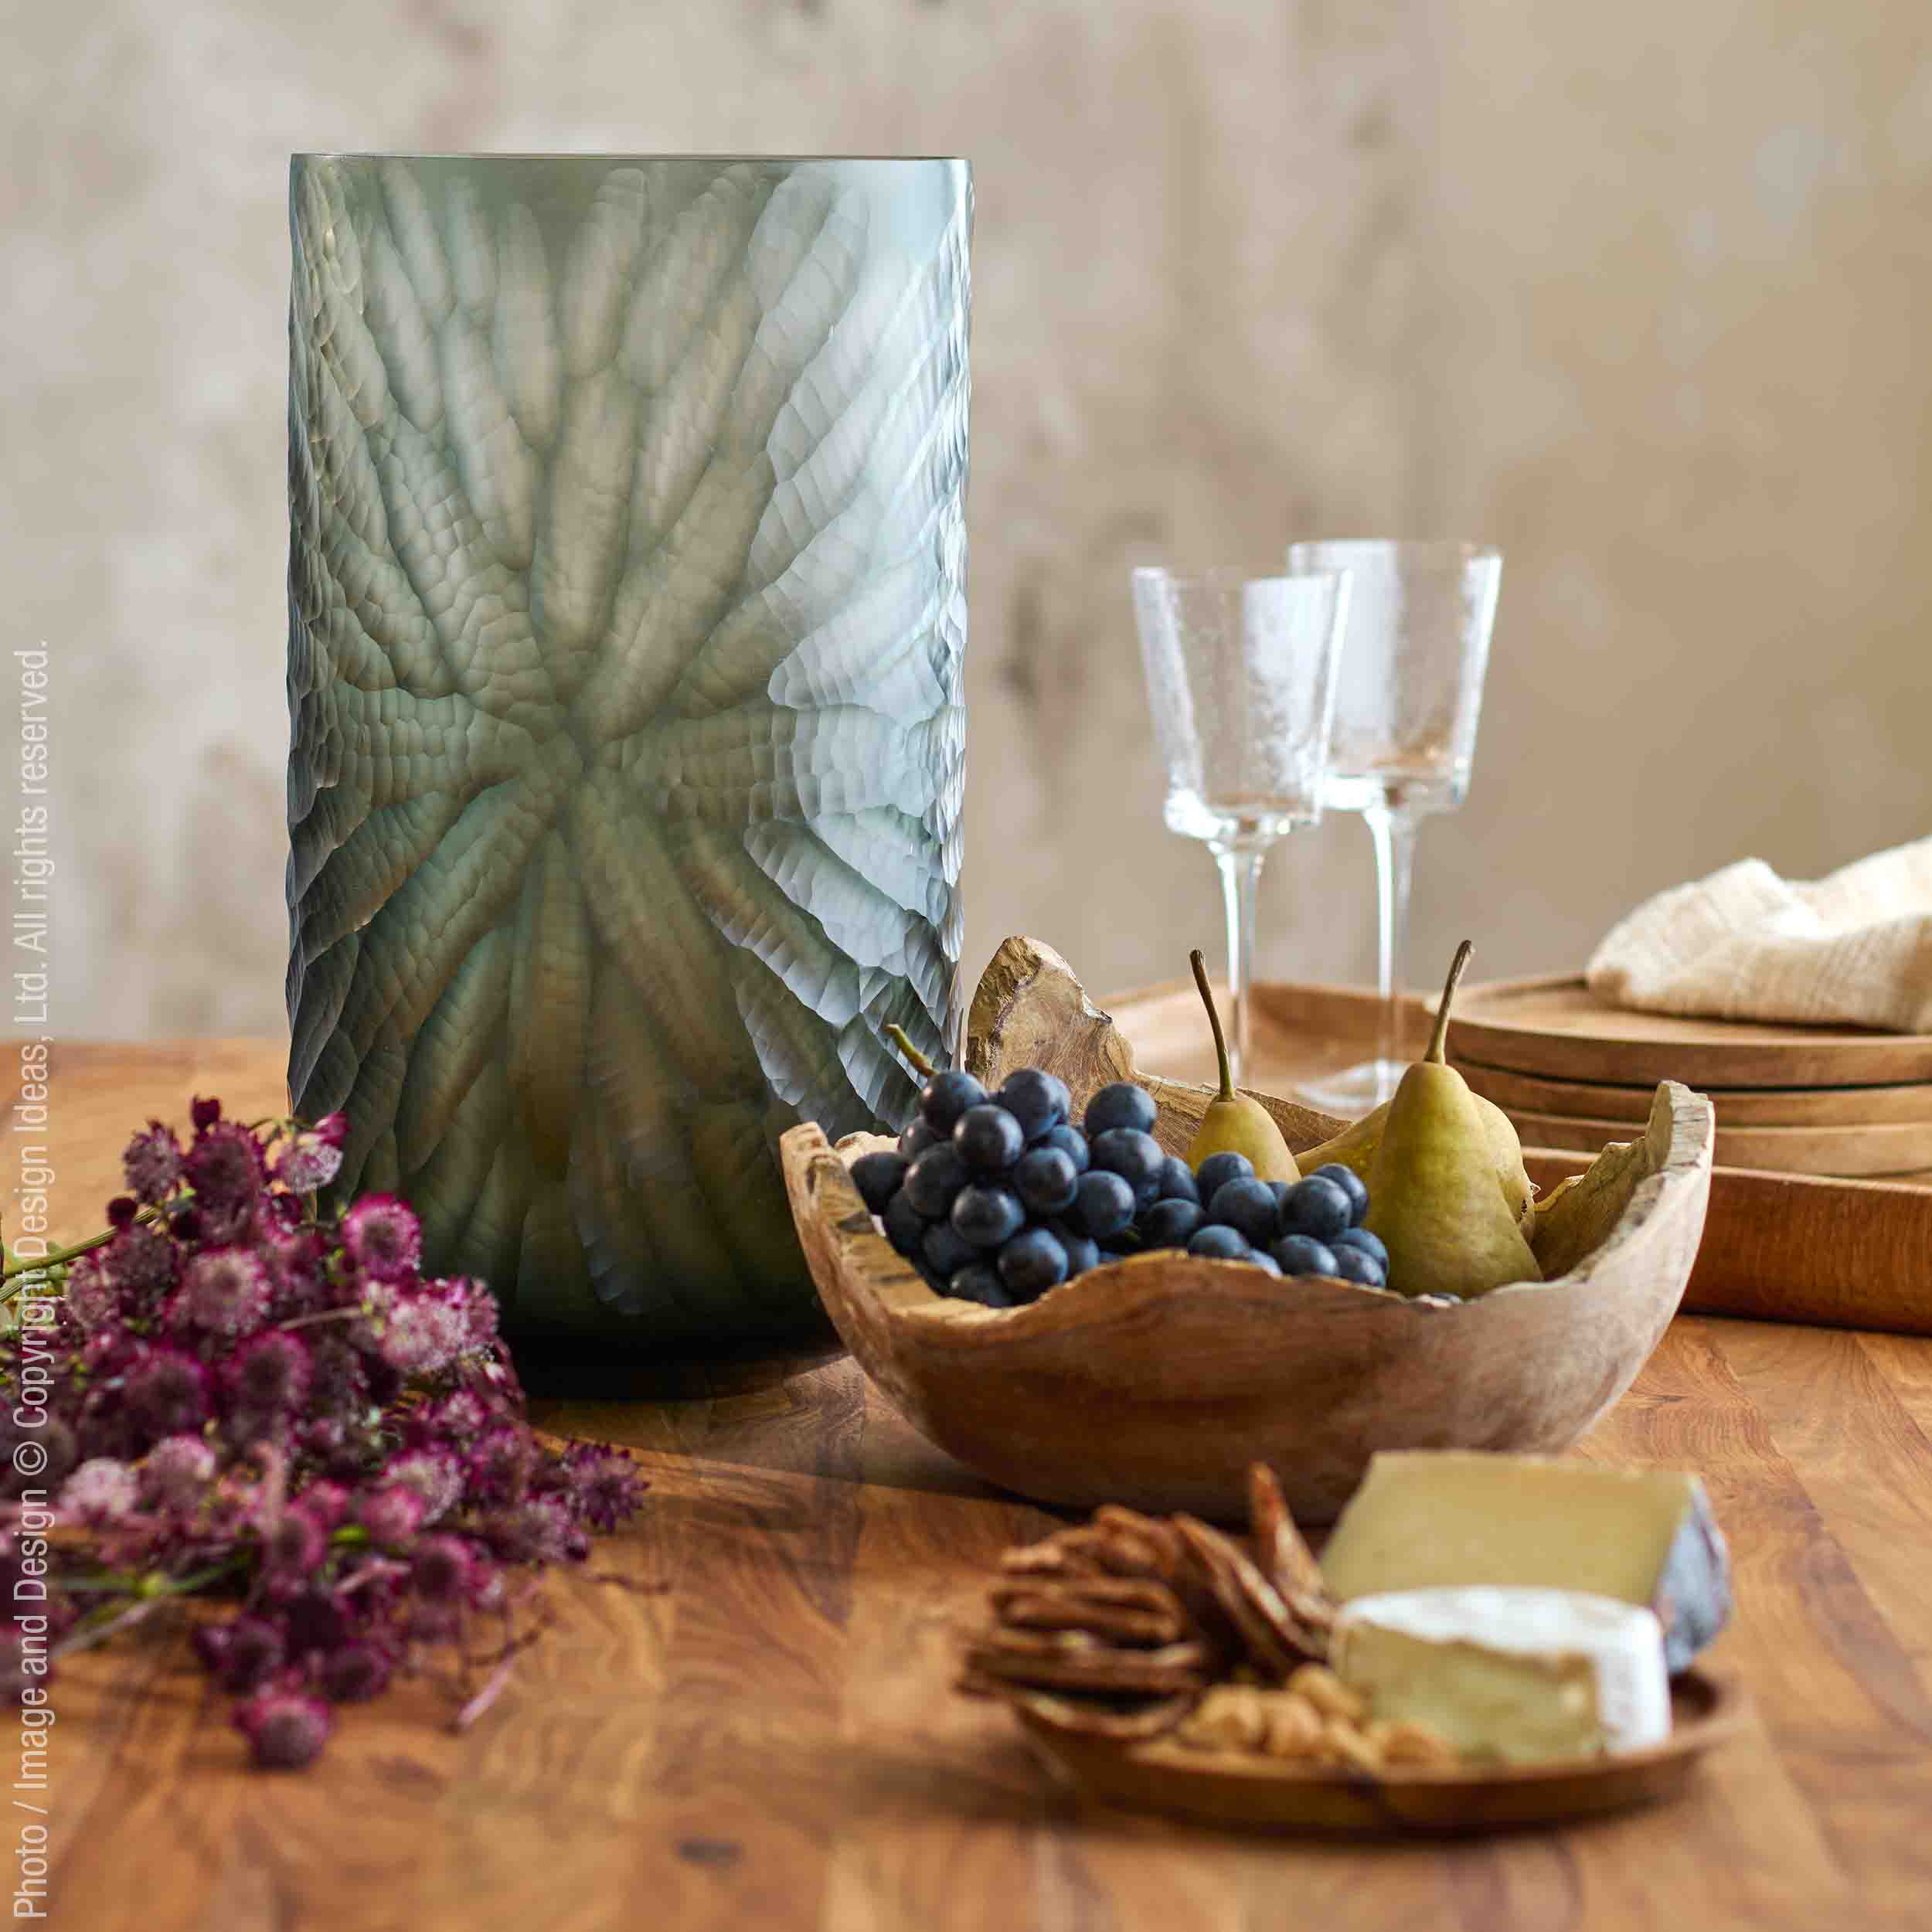 Highland™ vase - Gray | Image 1 | Premium Vase from the Highland collection | made with Glass for long lasting use | texxture